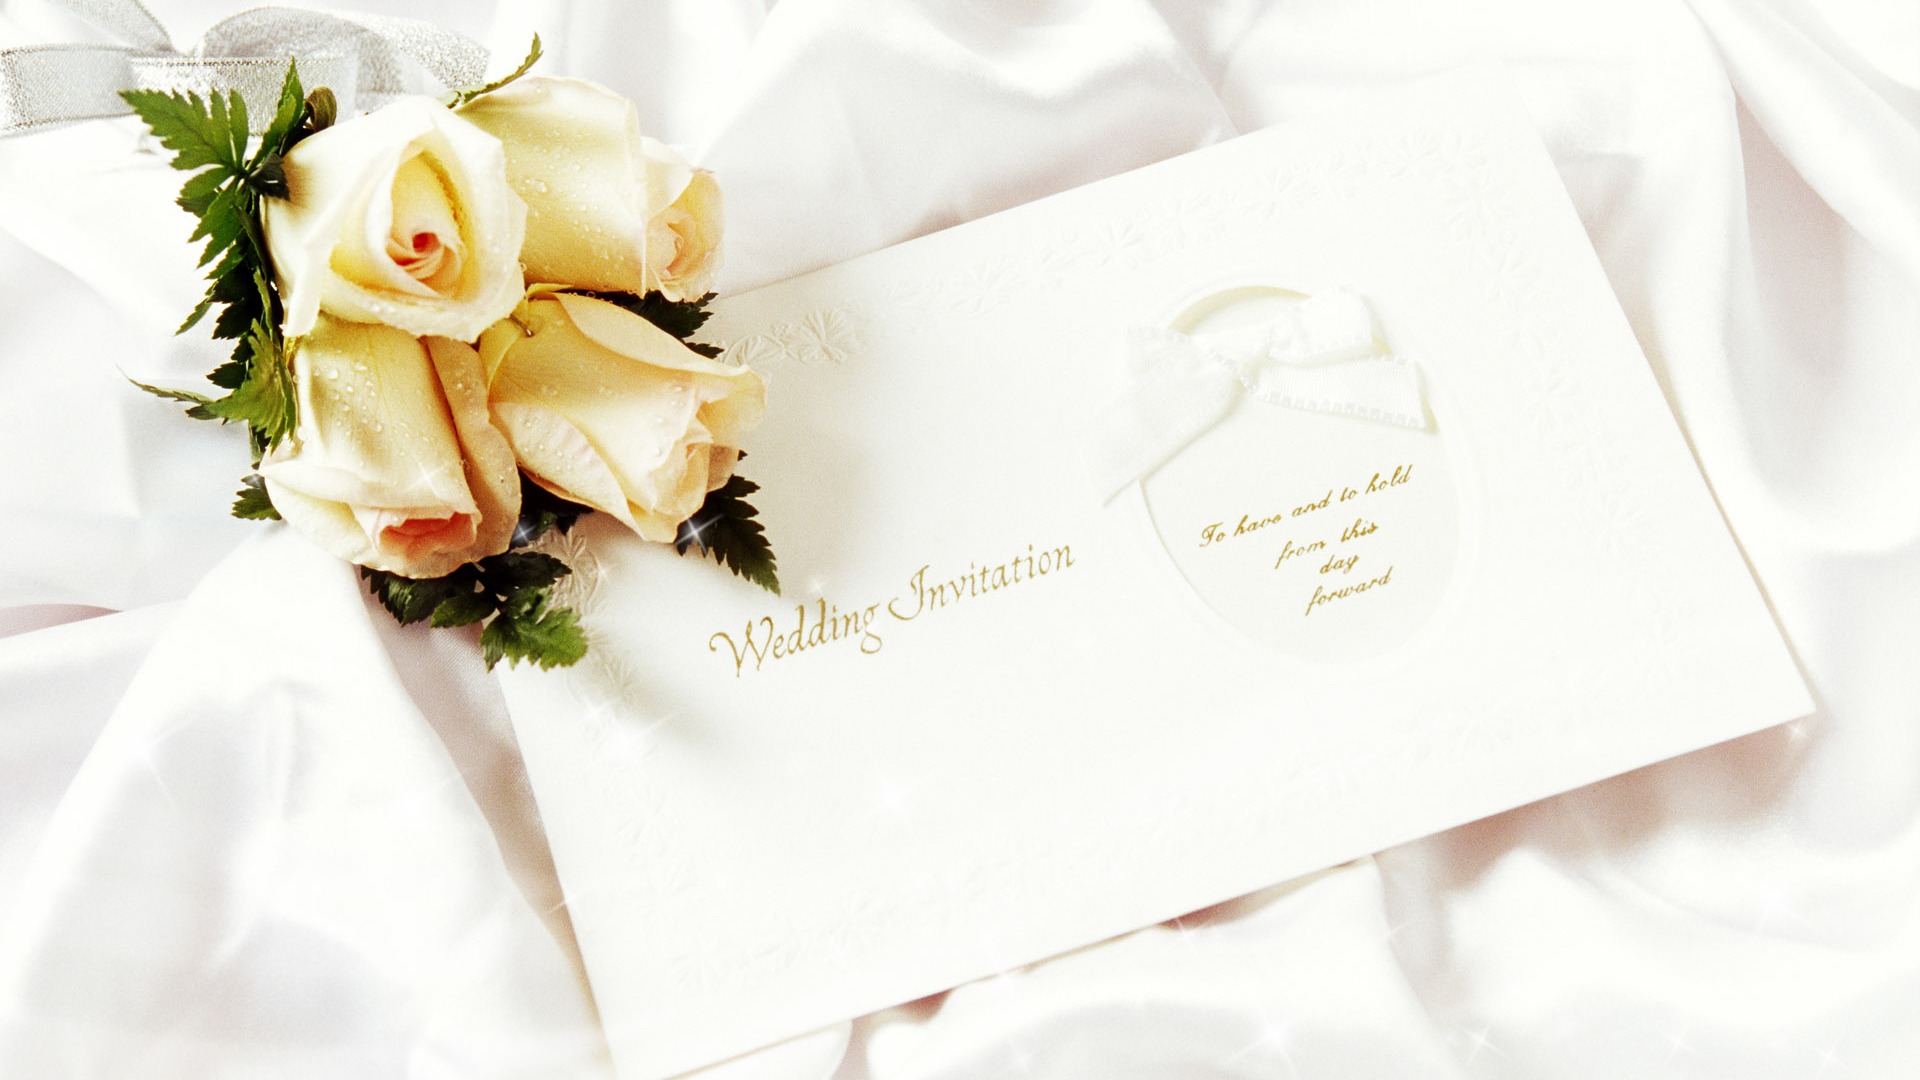 Weddings and Flowers wallpaper (1) #6 - 1920x1080